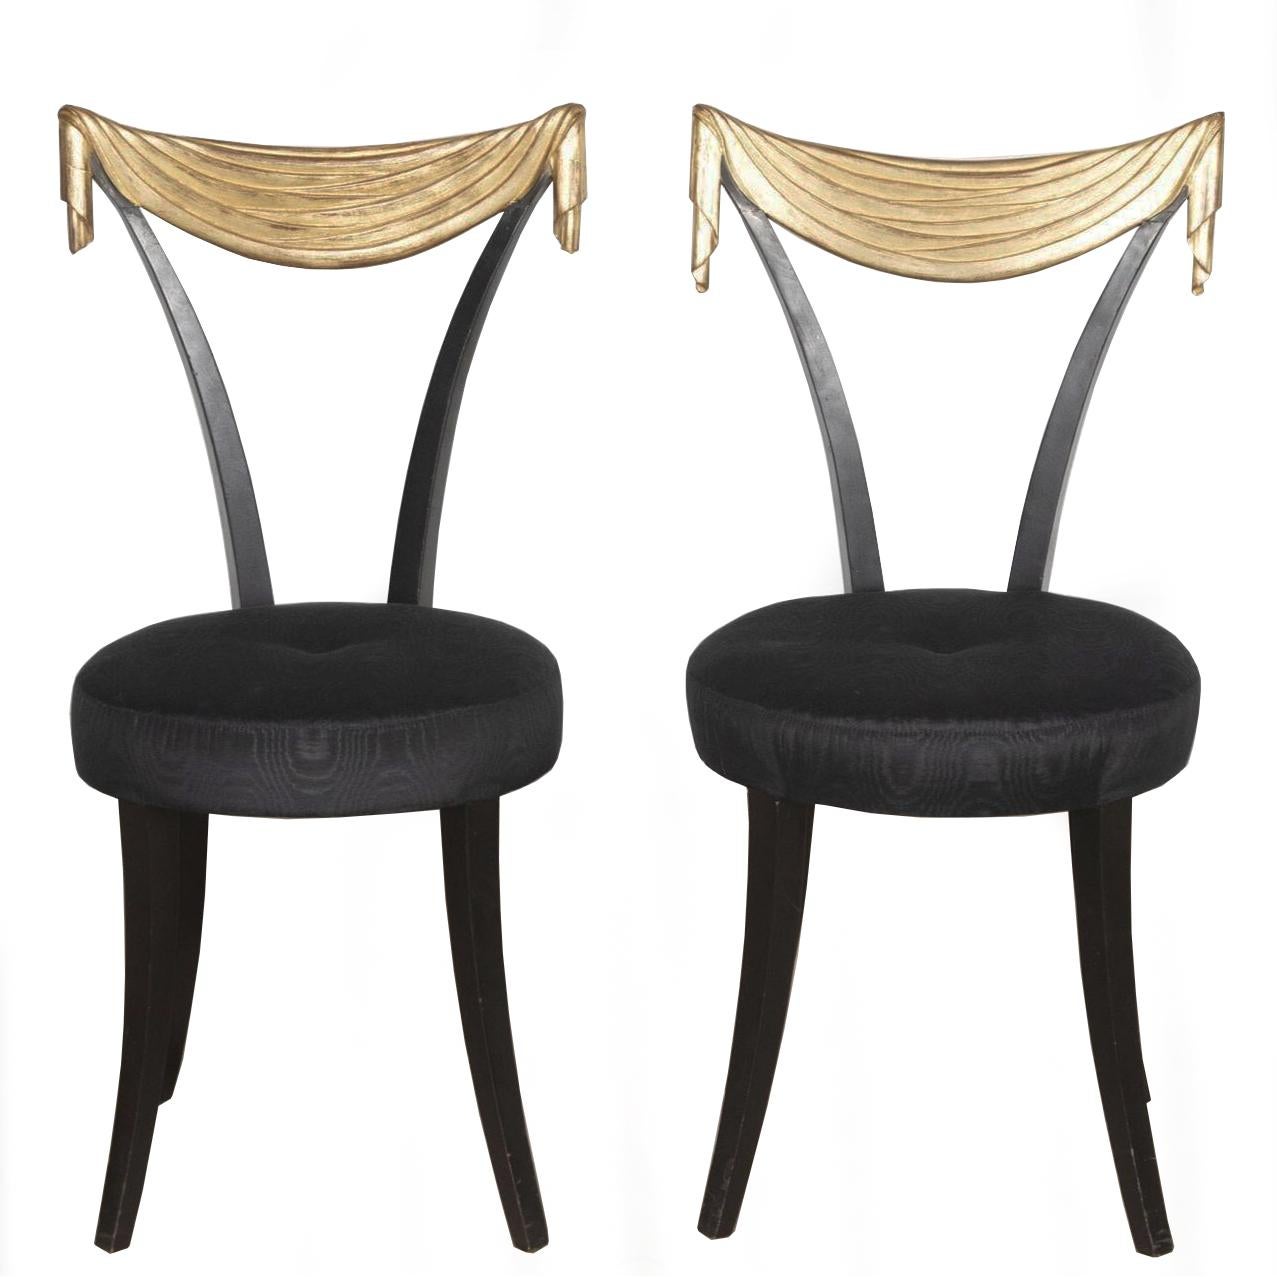 An eccentric pair of Dorothy Draper style designed ebonised side chairs with gilded drapery backs, sitting on elegantly tapered legs. 

Newly reupholstered in a sumptuous woven black silk moire.